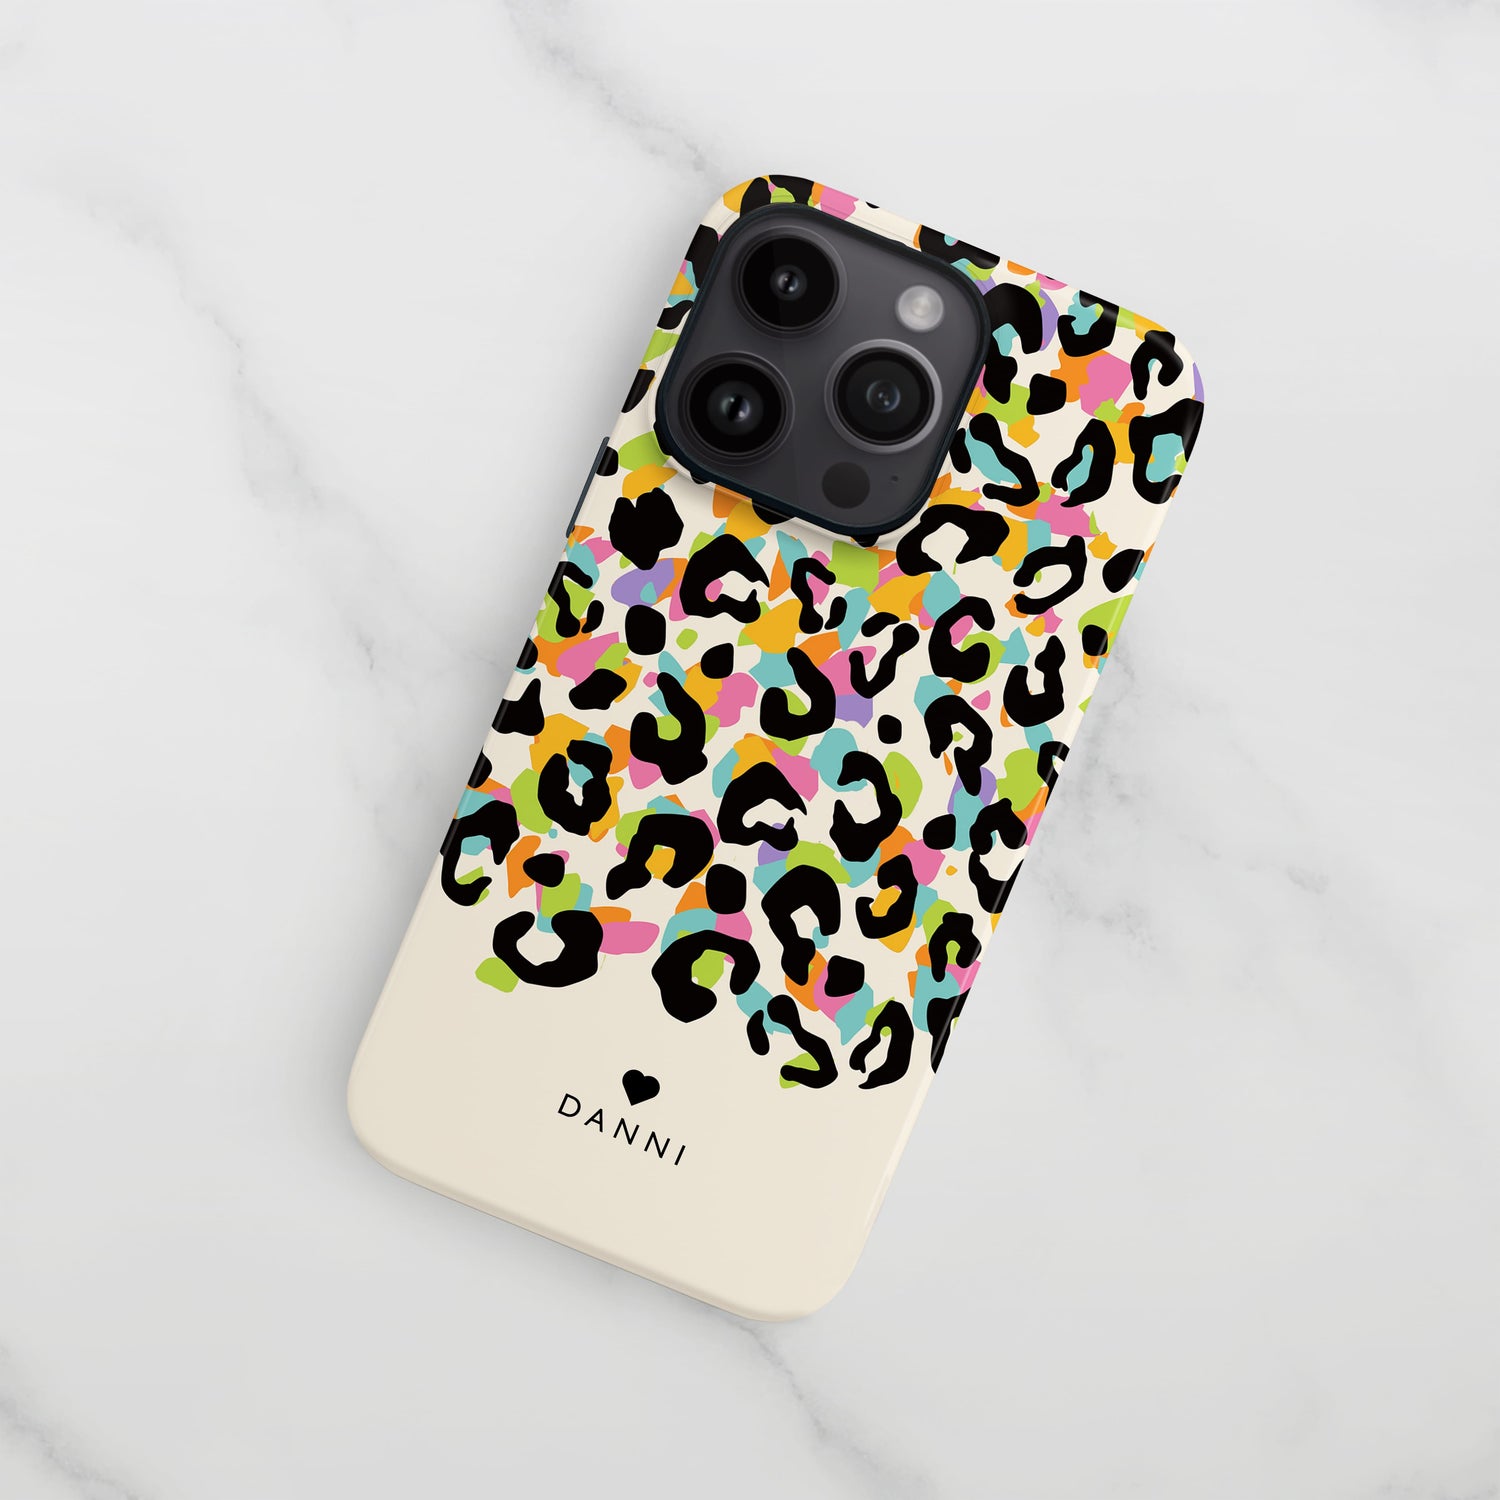 Abstract Rainbow Leopard Spots Personalised Case  Phone Case